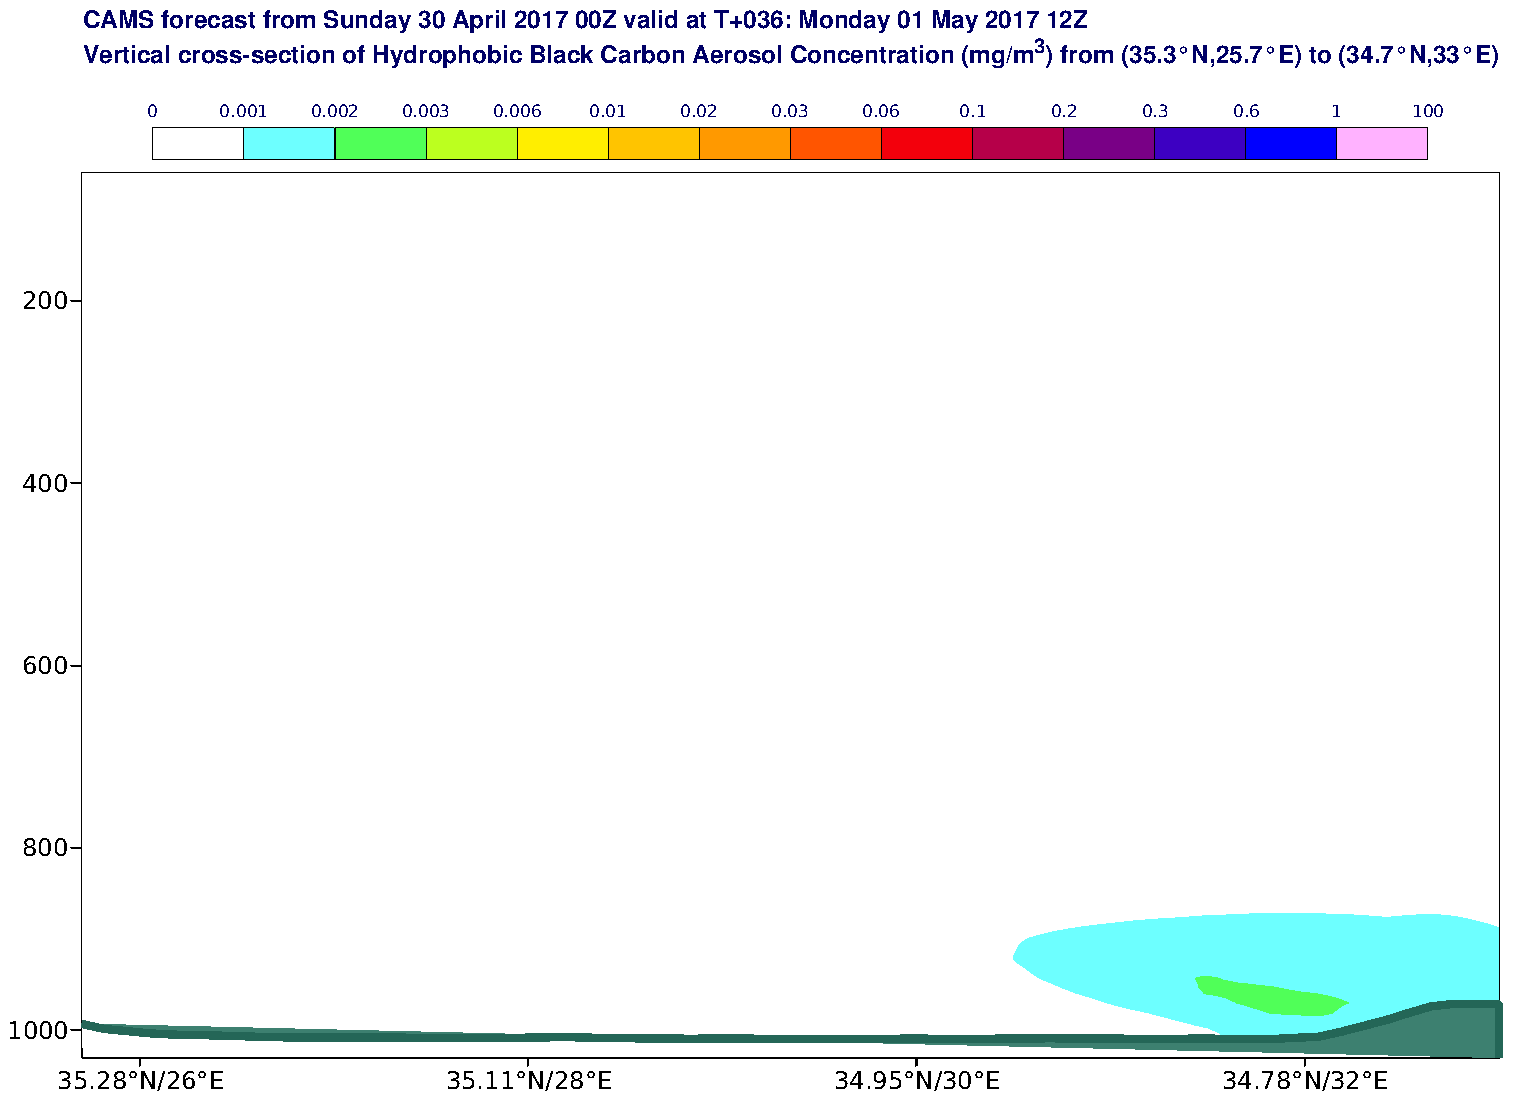 Vertical cross-section of Hydrophobic Black Carbon Aerosol Concentration (mg/m3) valid at T36 - 2017-05-01 12:00